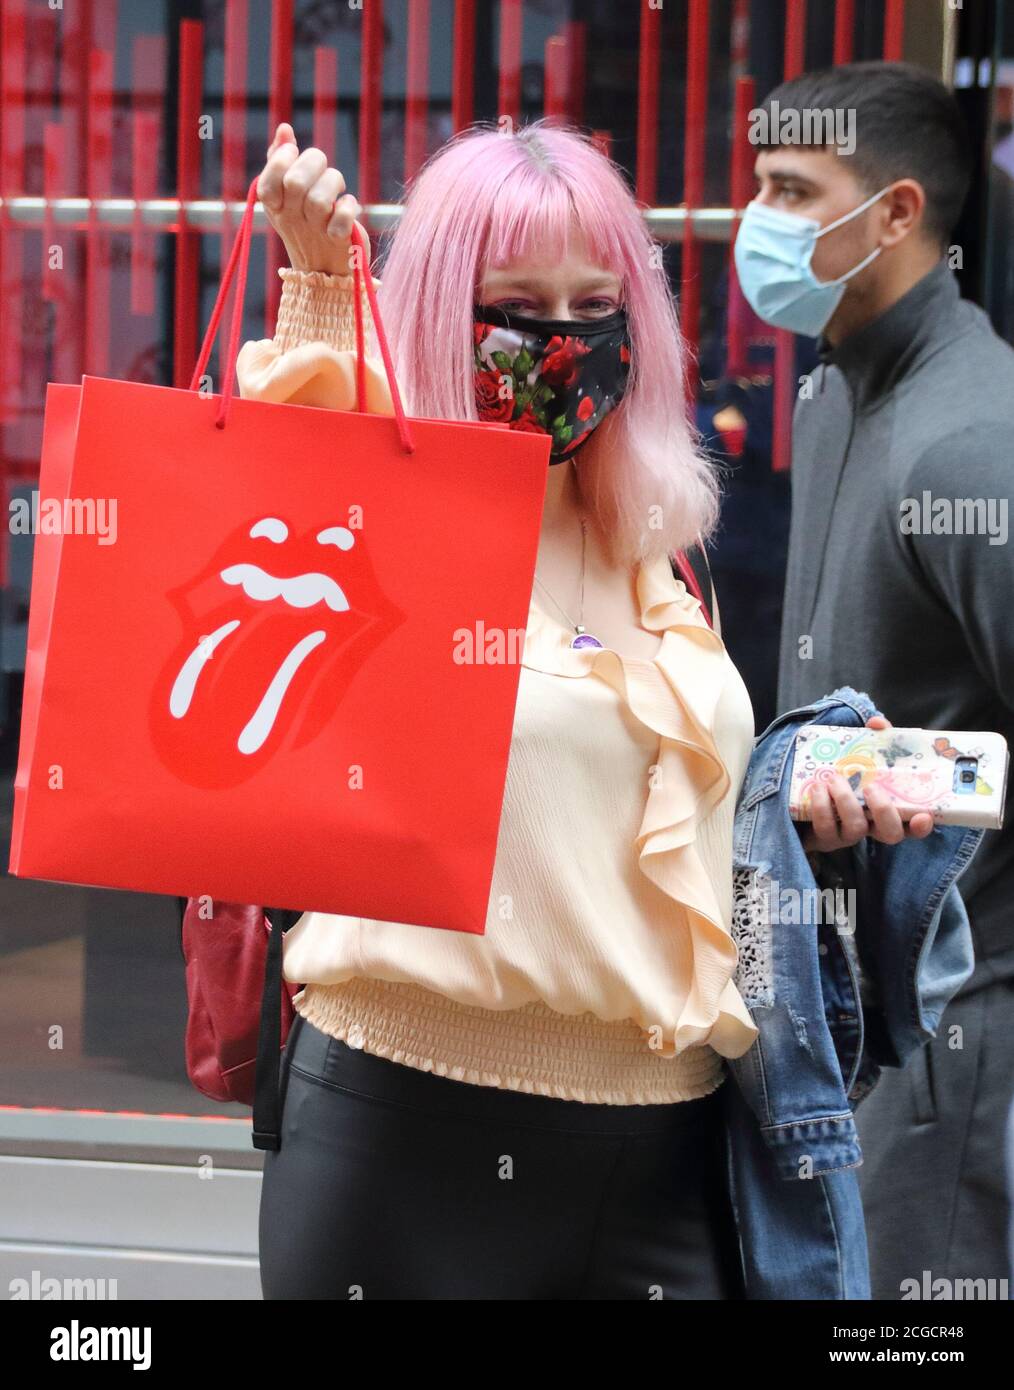 London, UK. 09th Sep, 2020. A lady with pink hair wearing a facemask holds her purchases inside a Rolling Stones logo bag outside the new store.The official Rolling Stones store, RS No. 9 opens in London's Carnaby Street. Credit: SOPA Images Limited/Alamy Live News Stock Photo